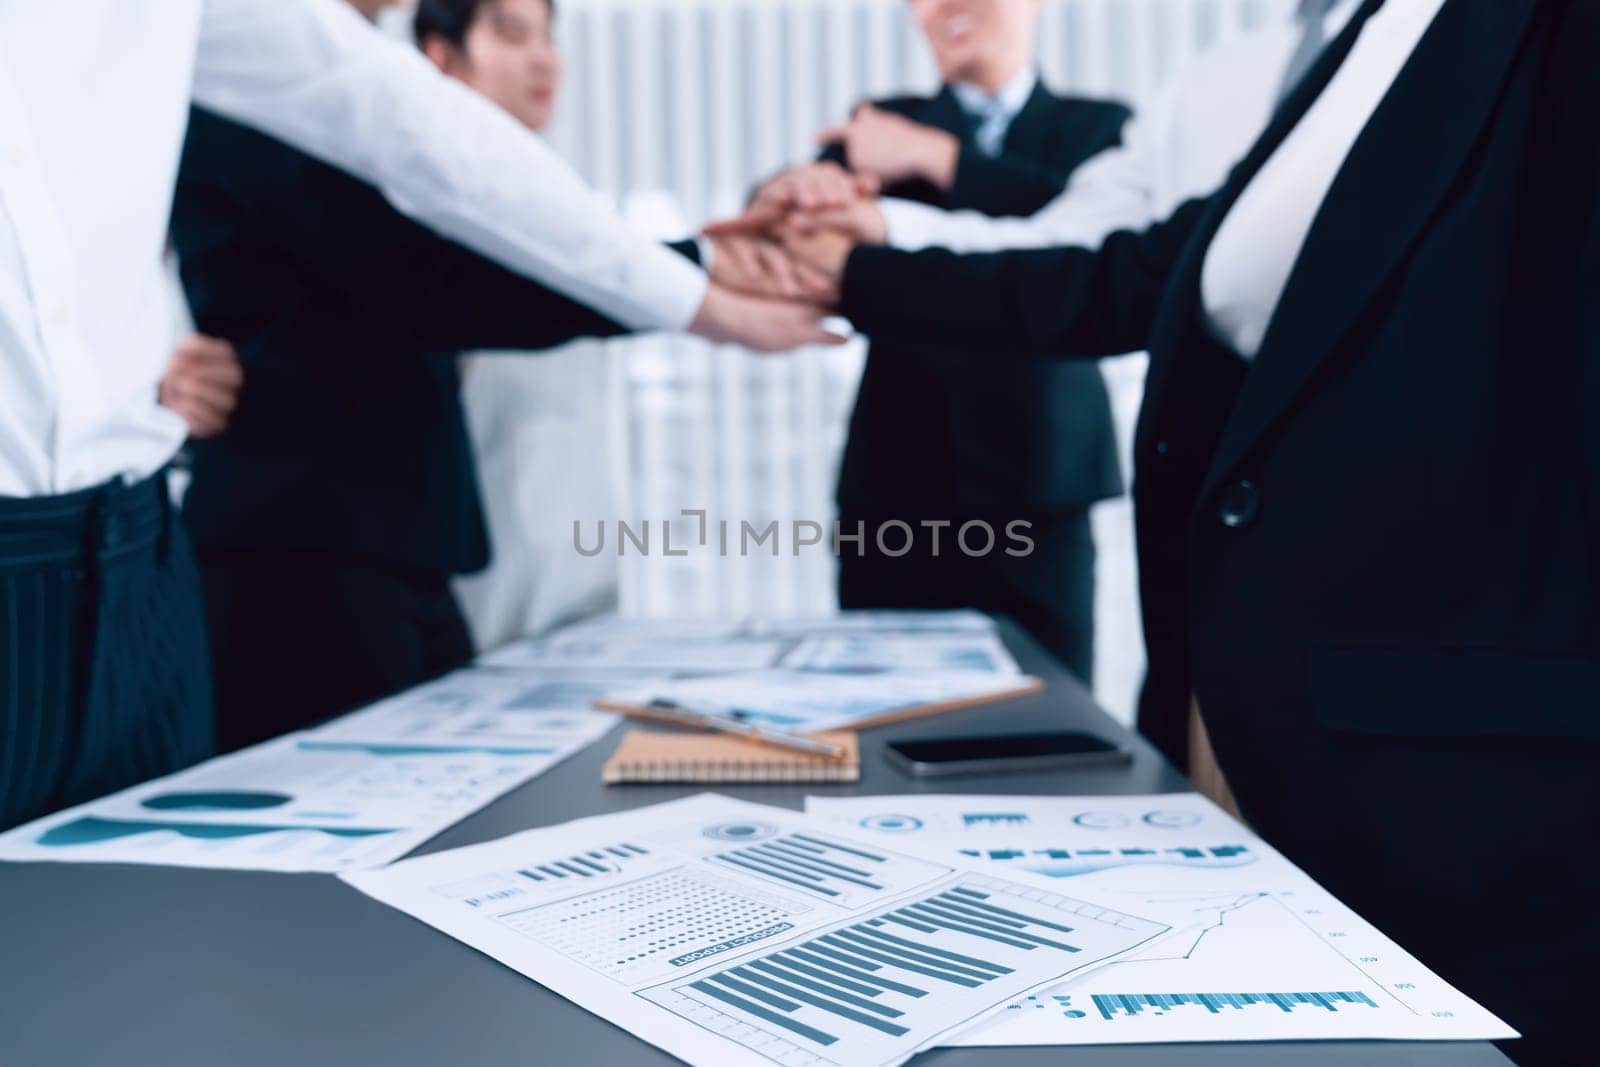 Focus financial report with statistic charts analyzed by BI papers on meeting table at conference room with blur business colleague people put hand stack together in background as harmony concept.